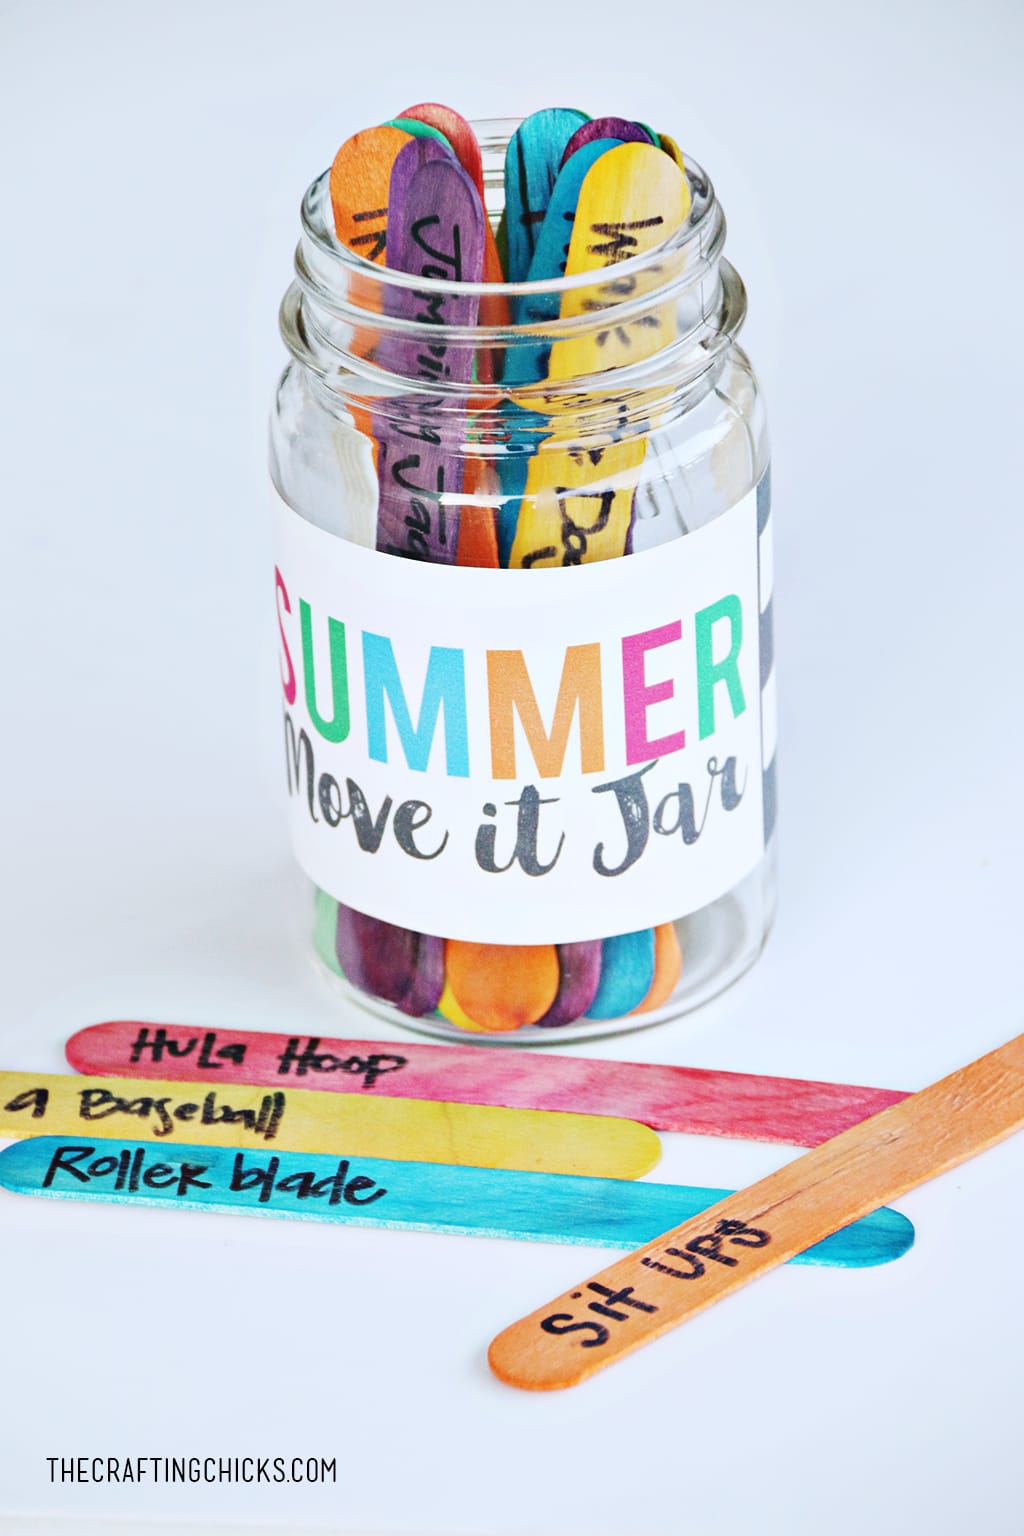 Mason Jar with colorful crafts sticks with movement actions written on them for kids to keep moving.